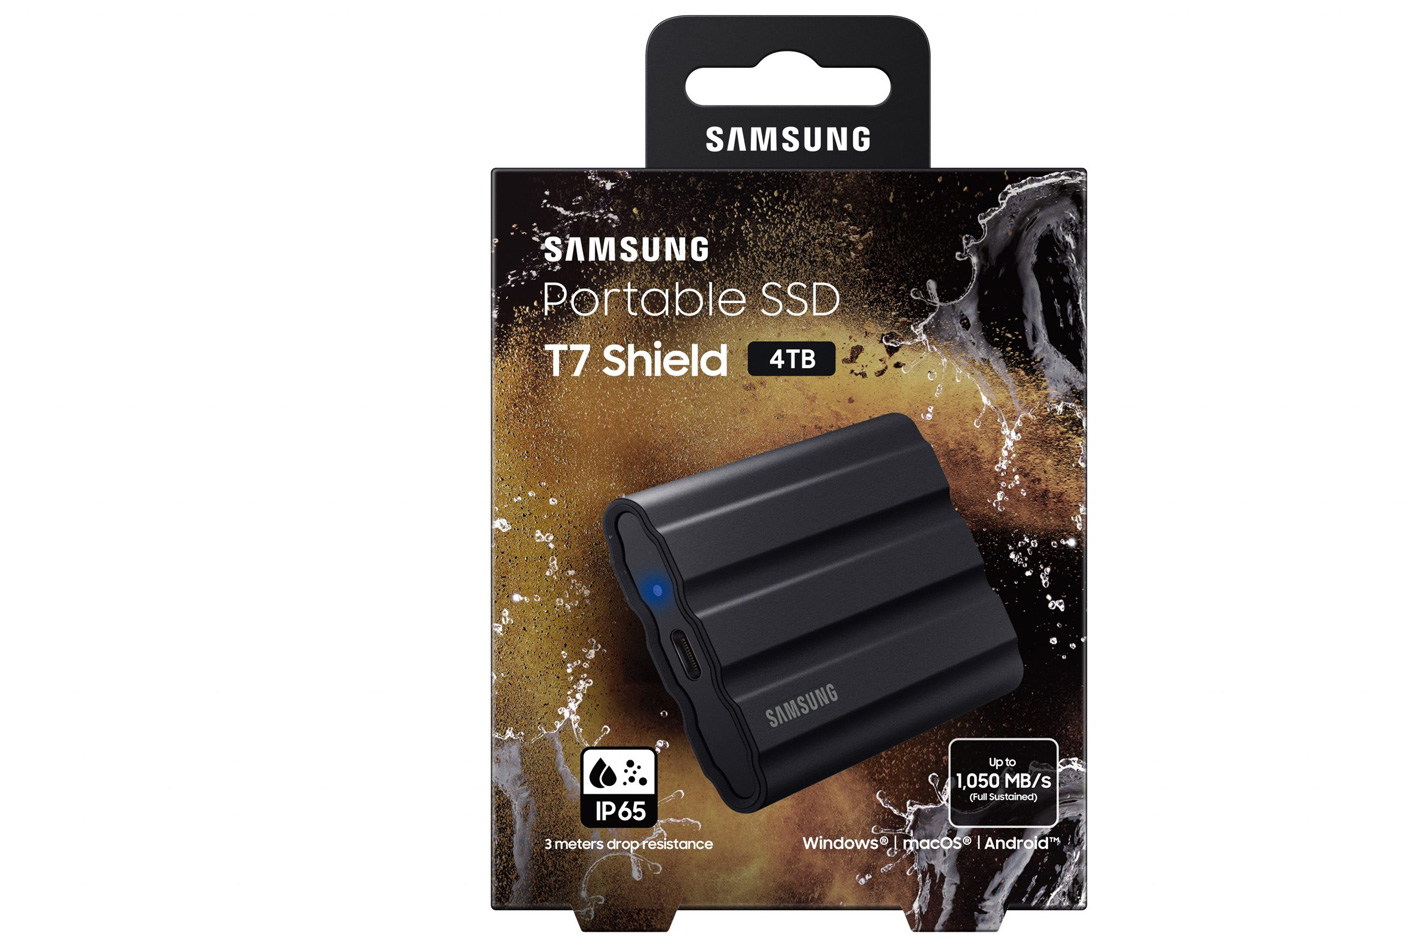 Samsung’s T7 Shield Portable SSD now has a 4TB version